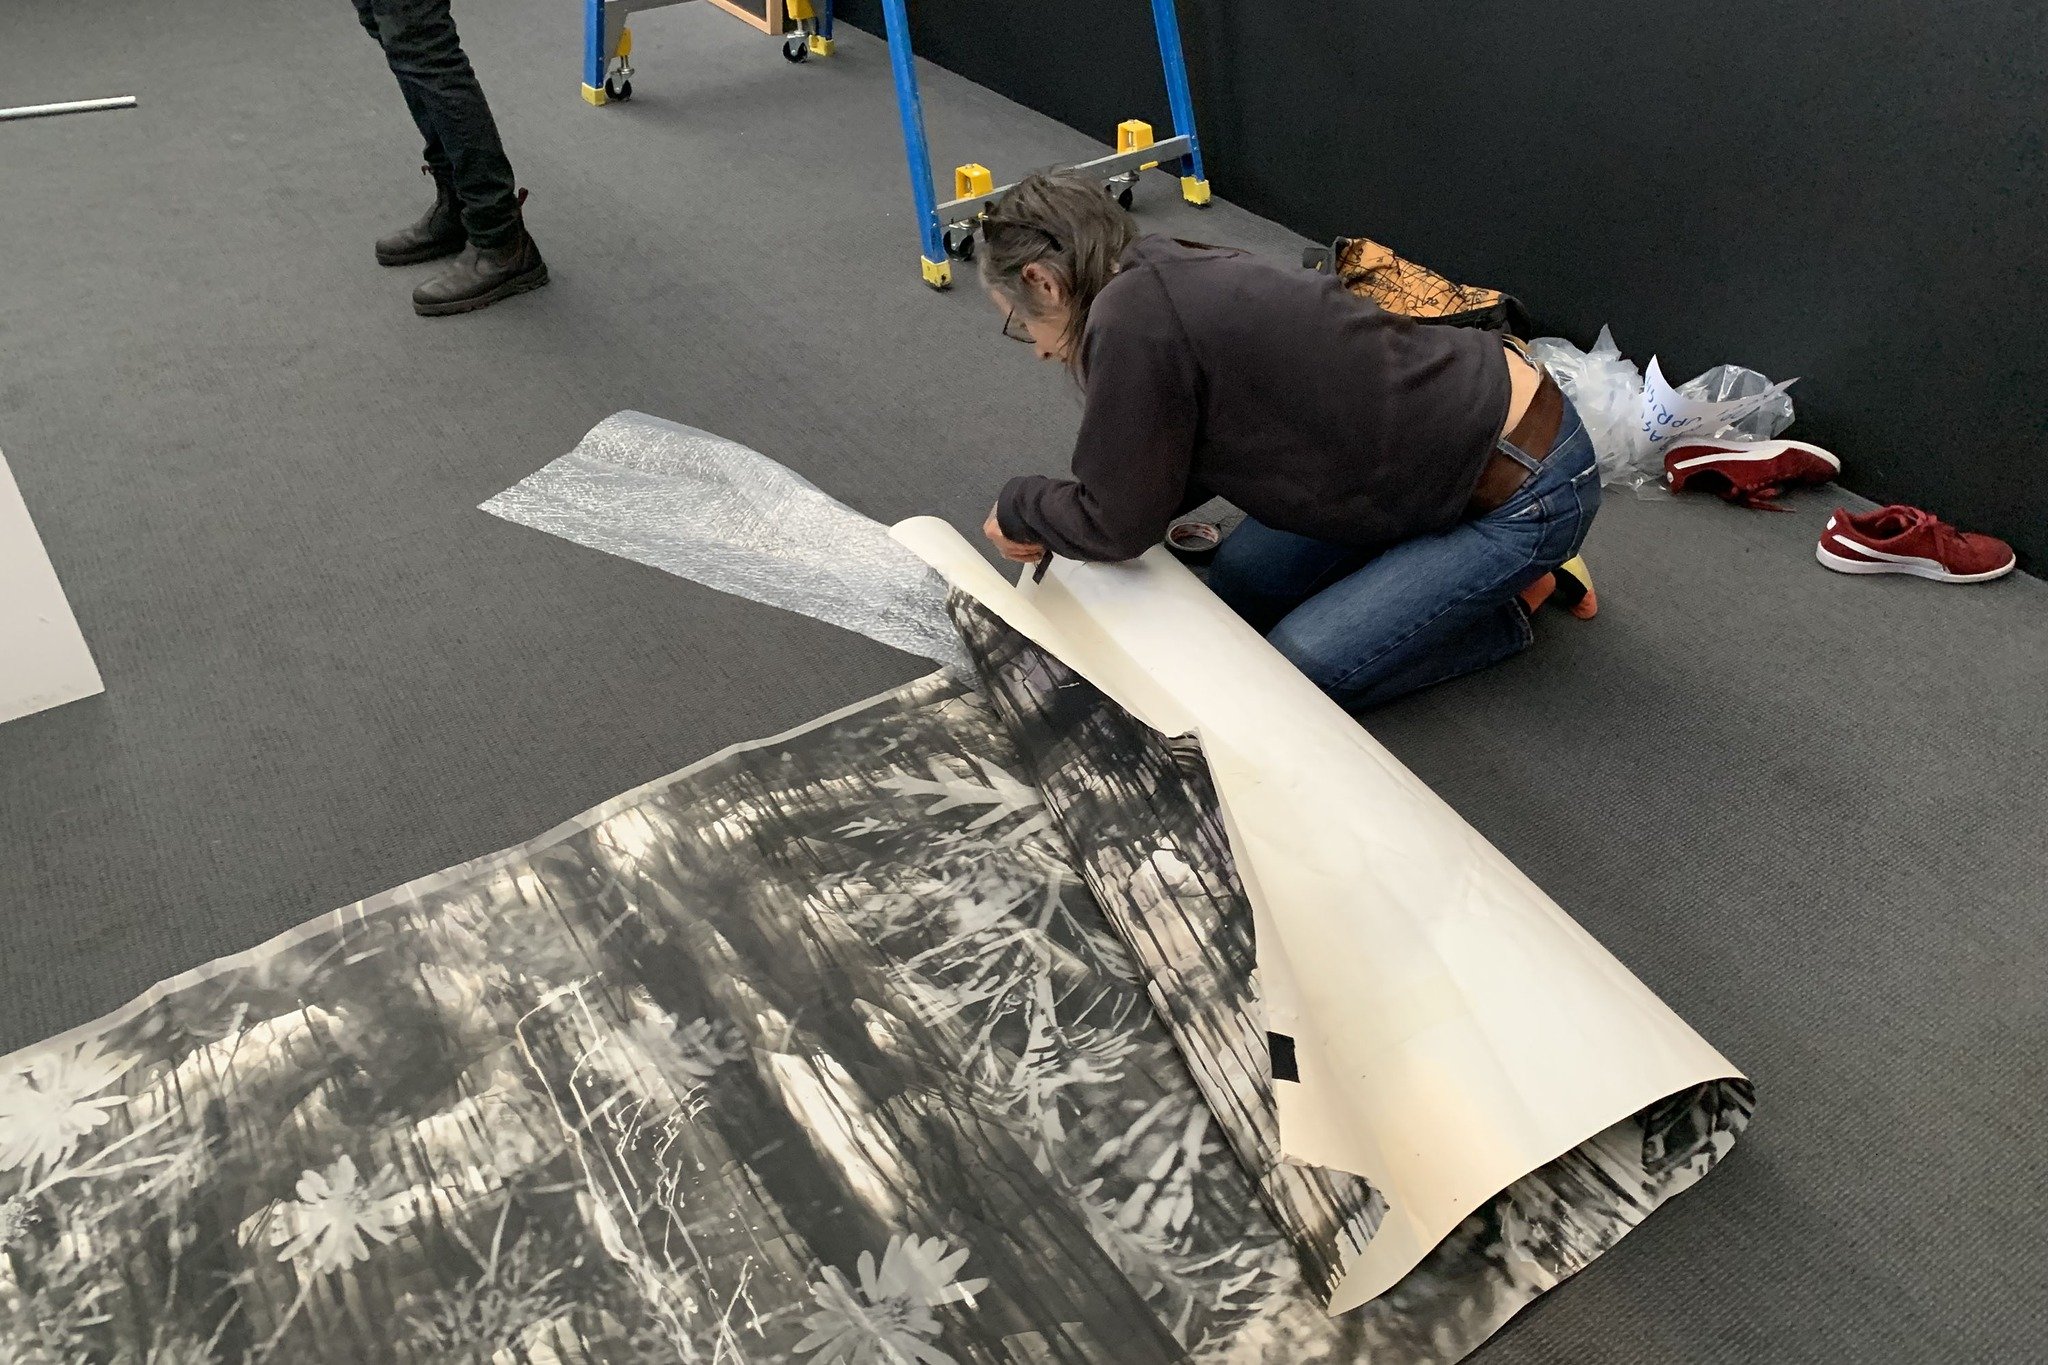  Zo Damage installing "TRUST" (2022) – MAPh Bowness Photography Prize 2023 shortlist – for the MAPh Bowness Prize 2023 finalist group exhibition. Photo courtesy MAPh, 2023 